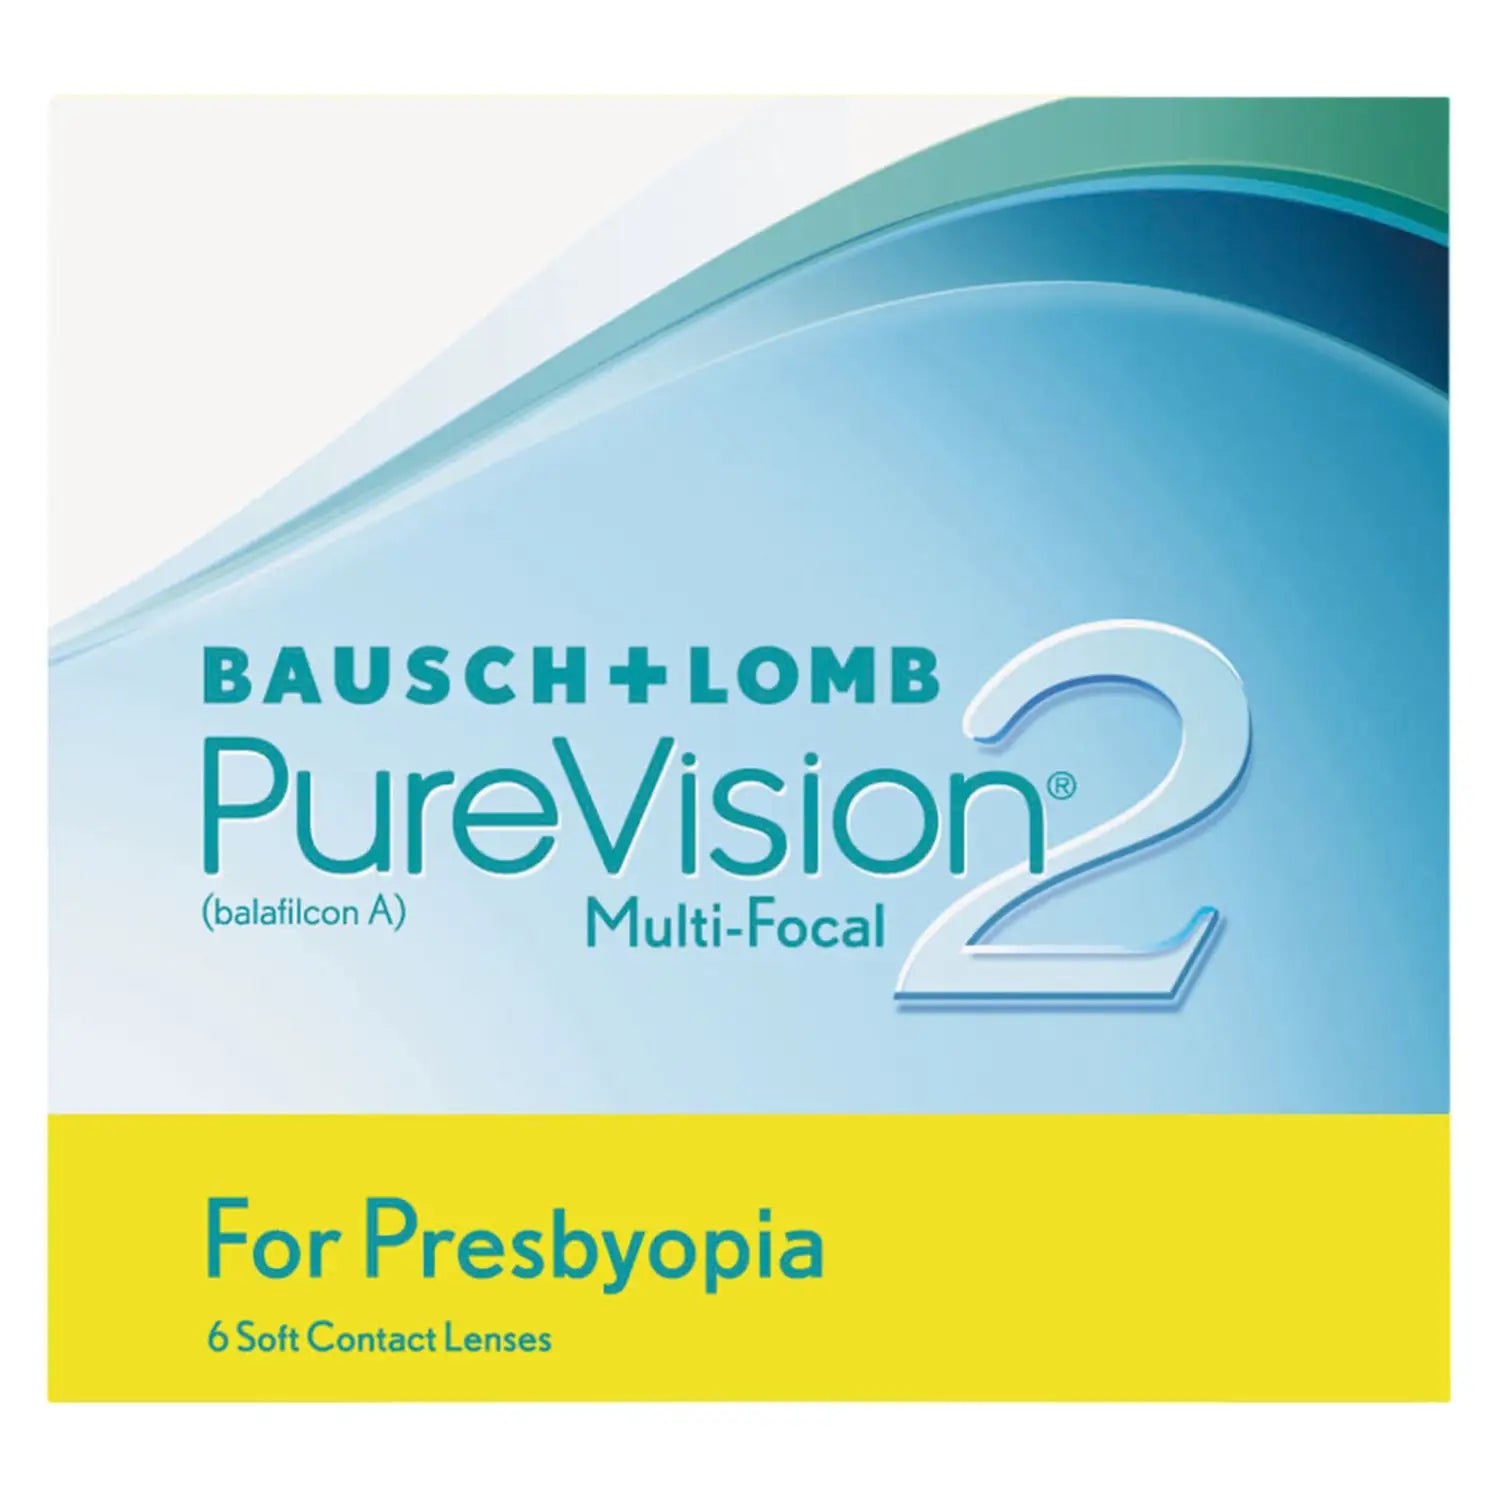 PureVision contact lenses